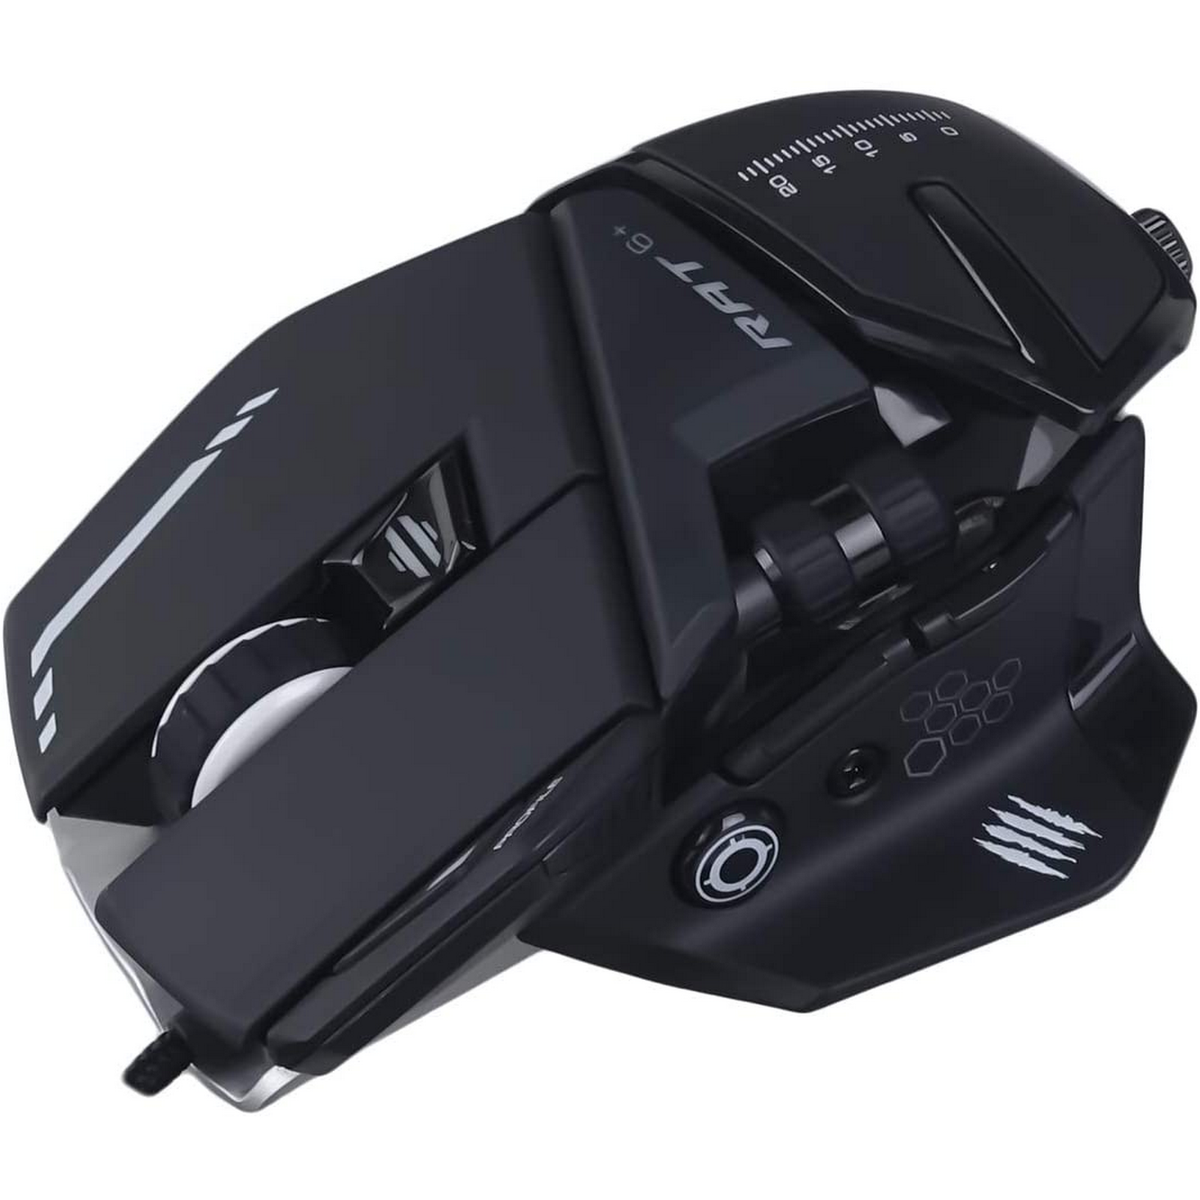 CATZ GAMING R.A.T. Gaming OPTICAL BL MAD MOUSE, Schwarz MR04DCINBL000-0 6+ Maus,